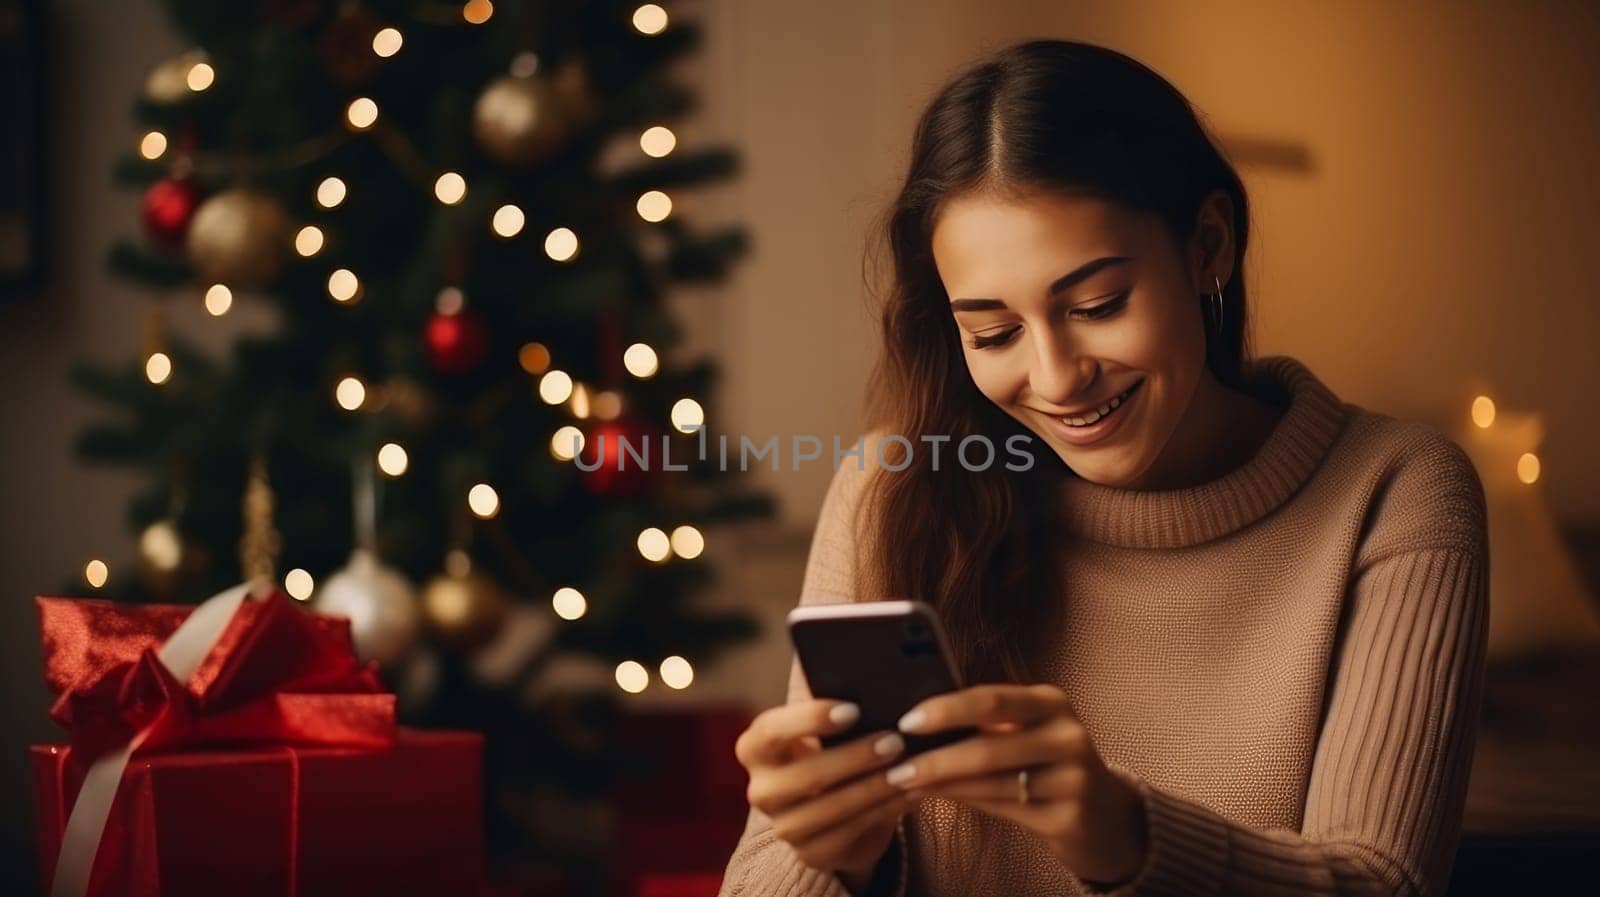 Young woman orders New Year gifts during Christmas holidays at home using smartphone and credit card.